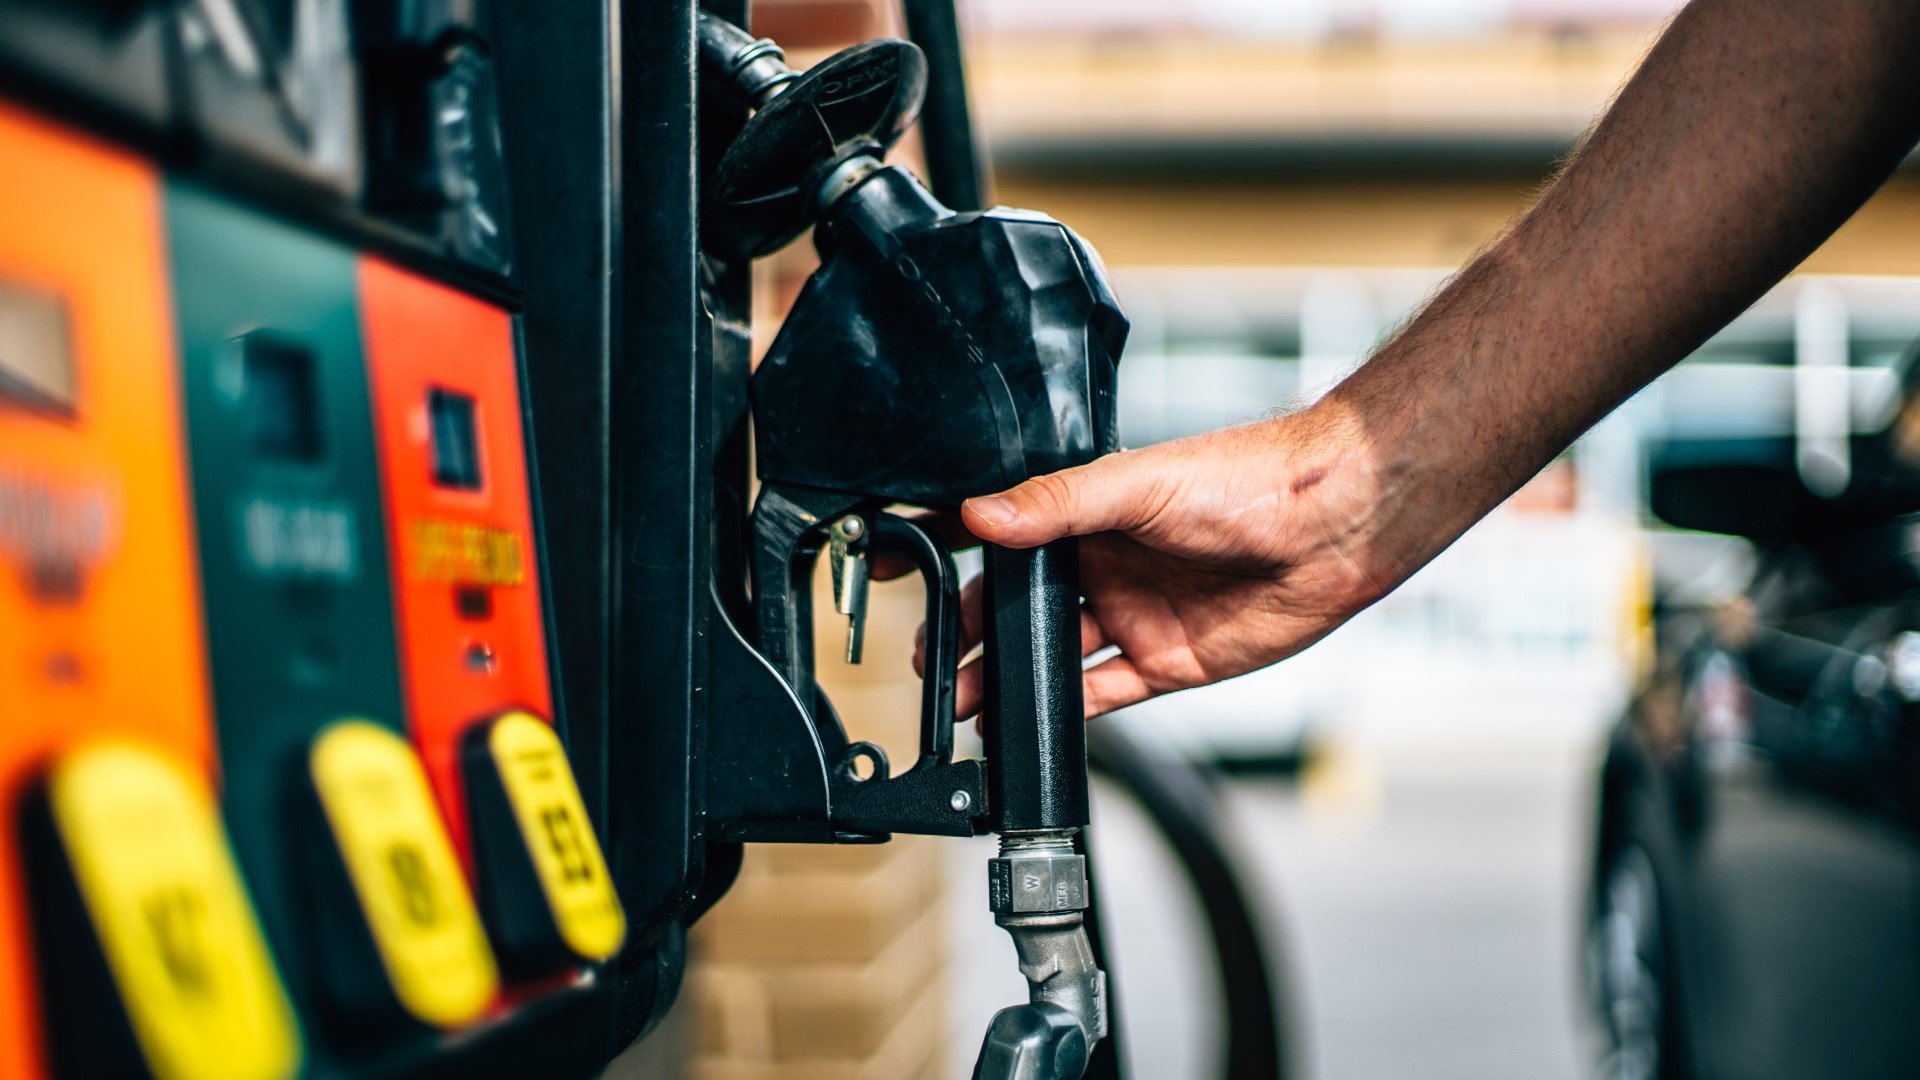 According to GasBuddy, Charlotte gas prices have fallen in the past week but are still $1.20 per gallon higher than 2020.